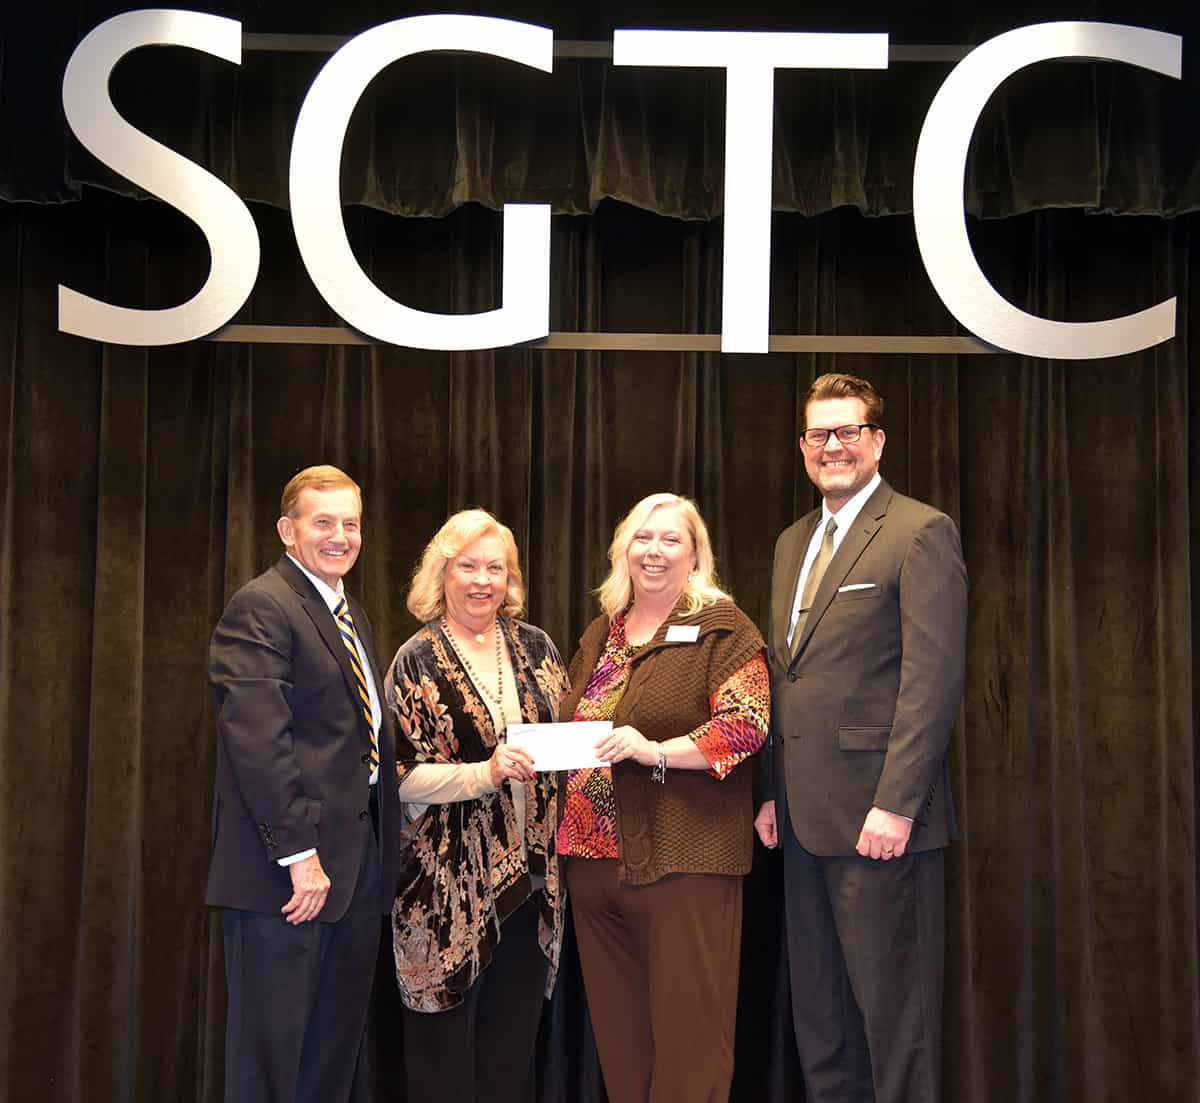 South Georgia Technical College President Emeritus Sparky Reeves (l to r) and Allene, are shown above presenting a check to SGTC 2018 Instructor of the Year Teresa McCook. SGTC President Dr. John Watford is also shown thanking the Reeves and Teresa McCook on her recognition.